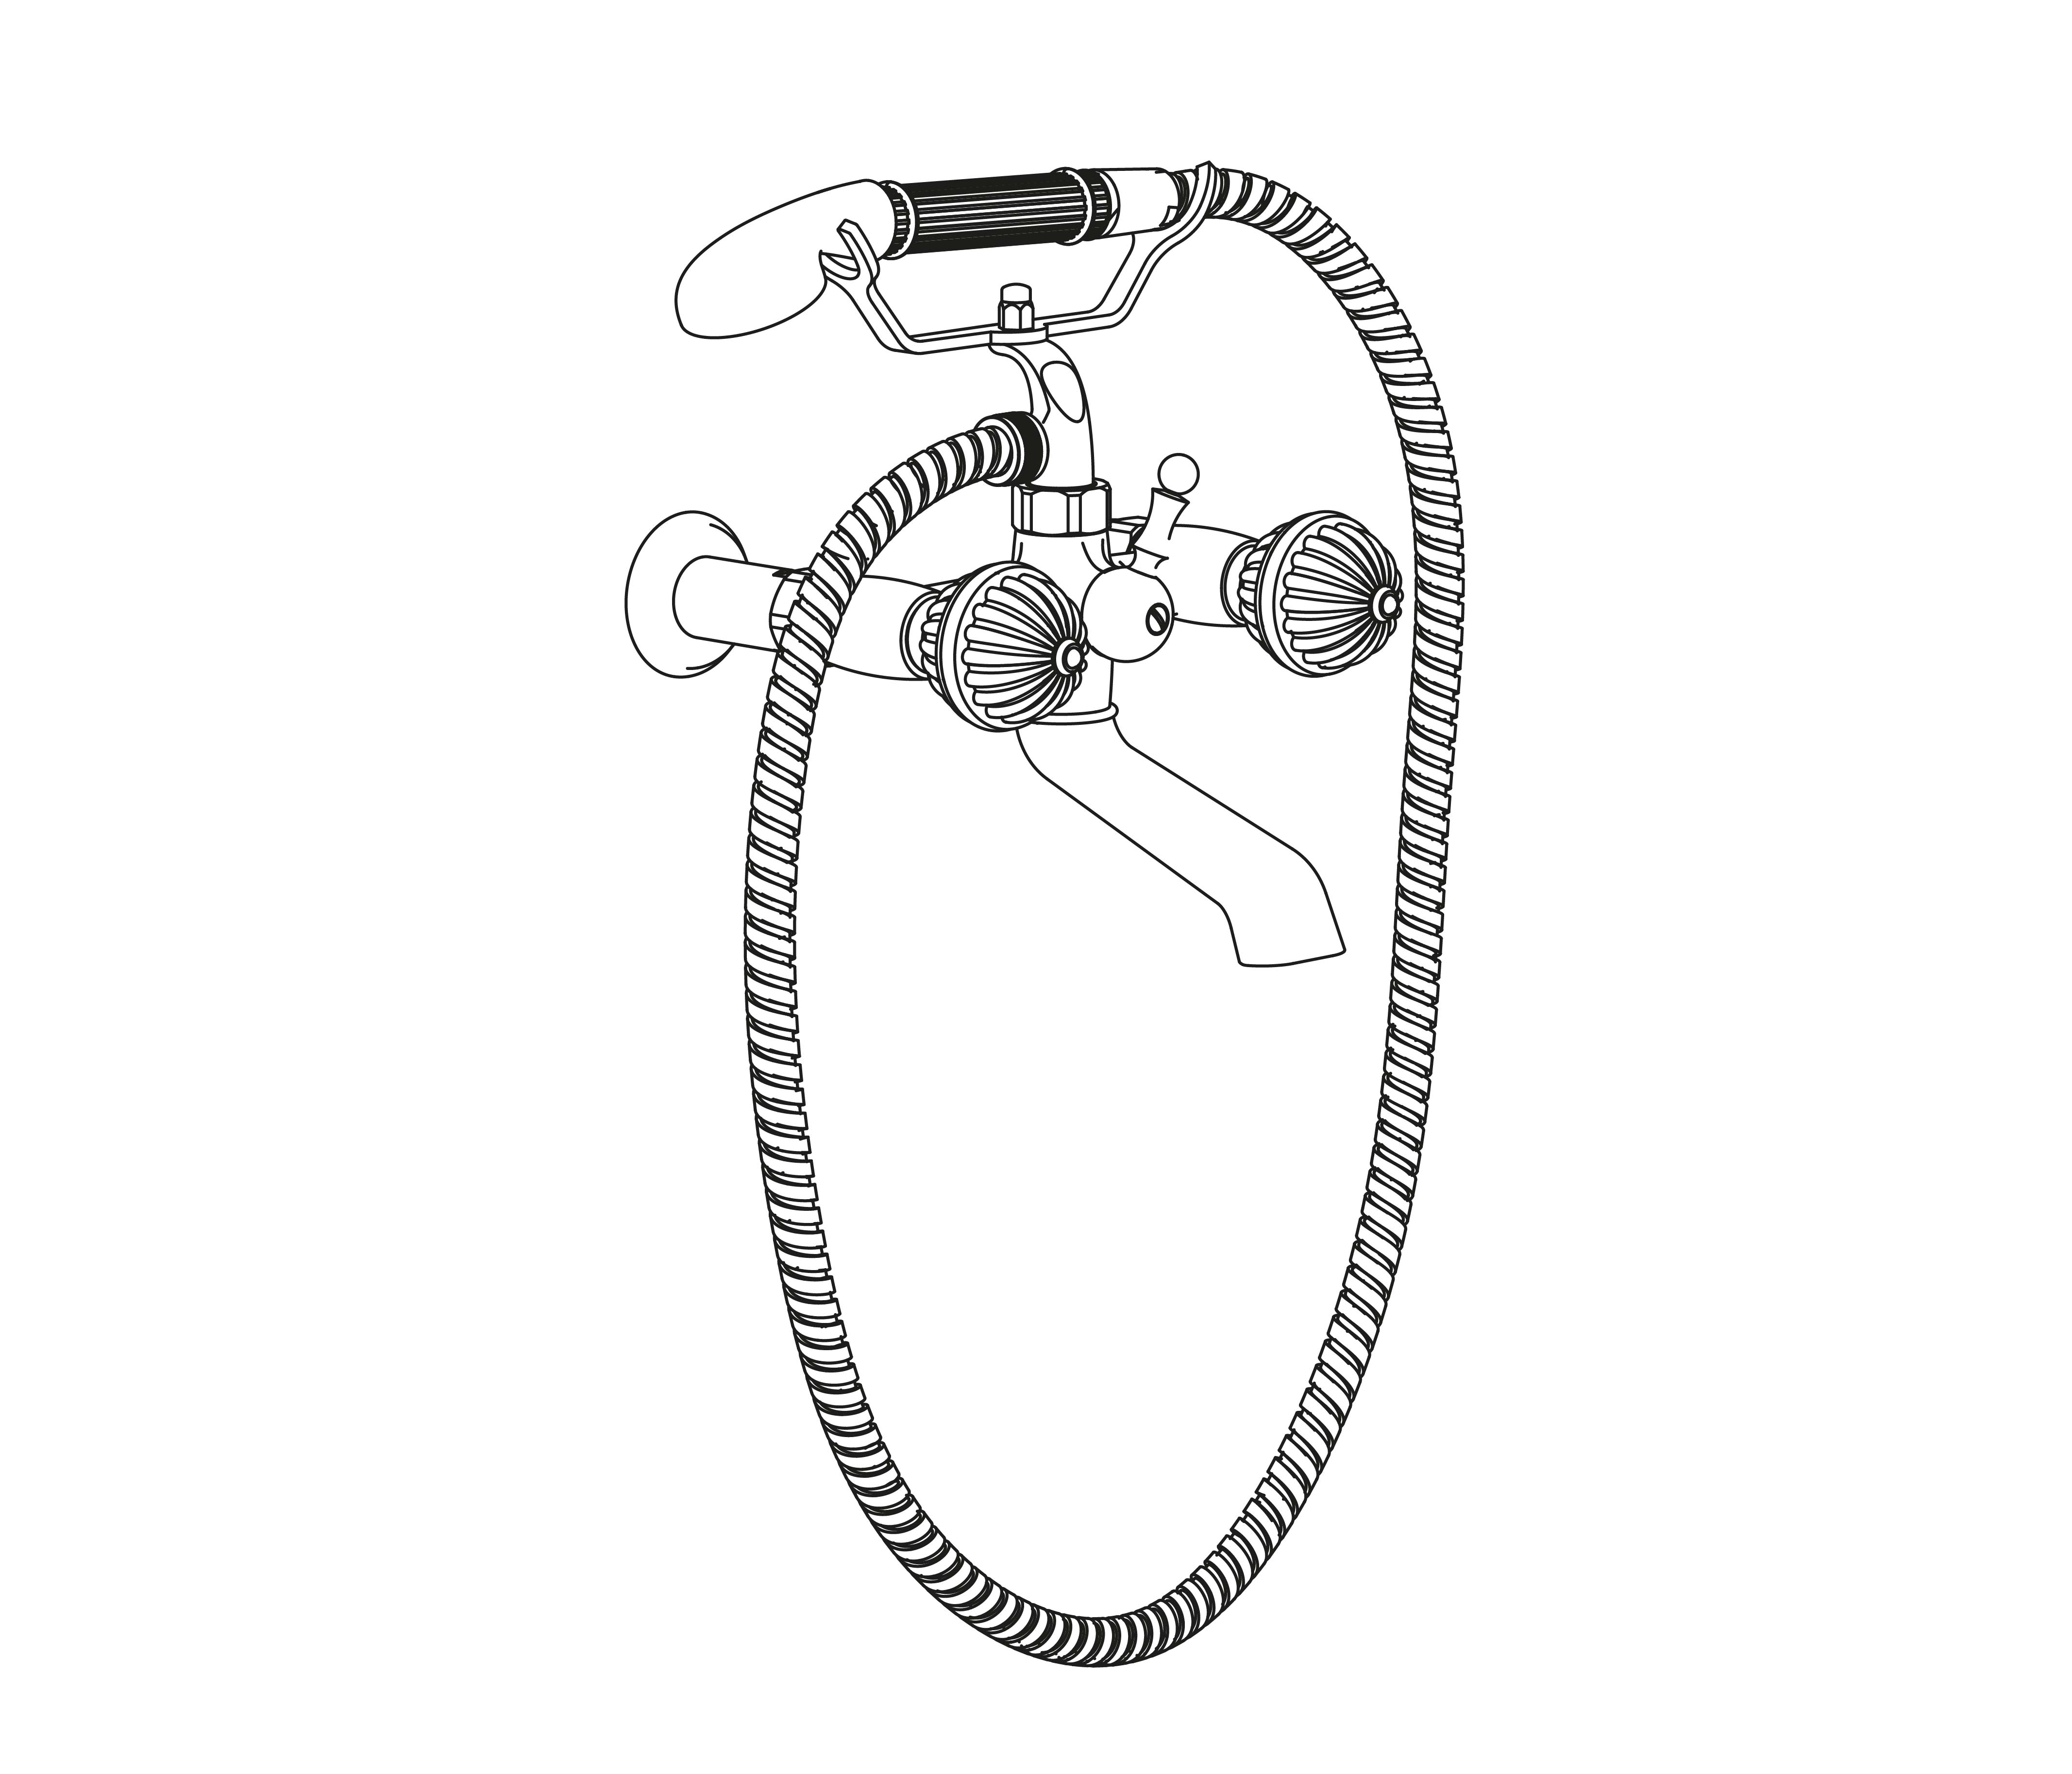 S126-3201 Wall mounted bath and shower mixer